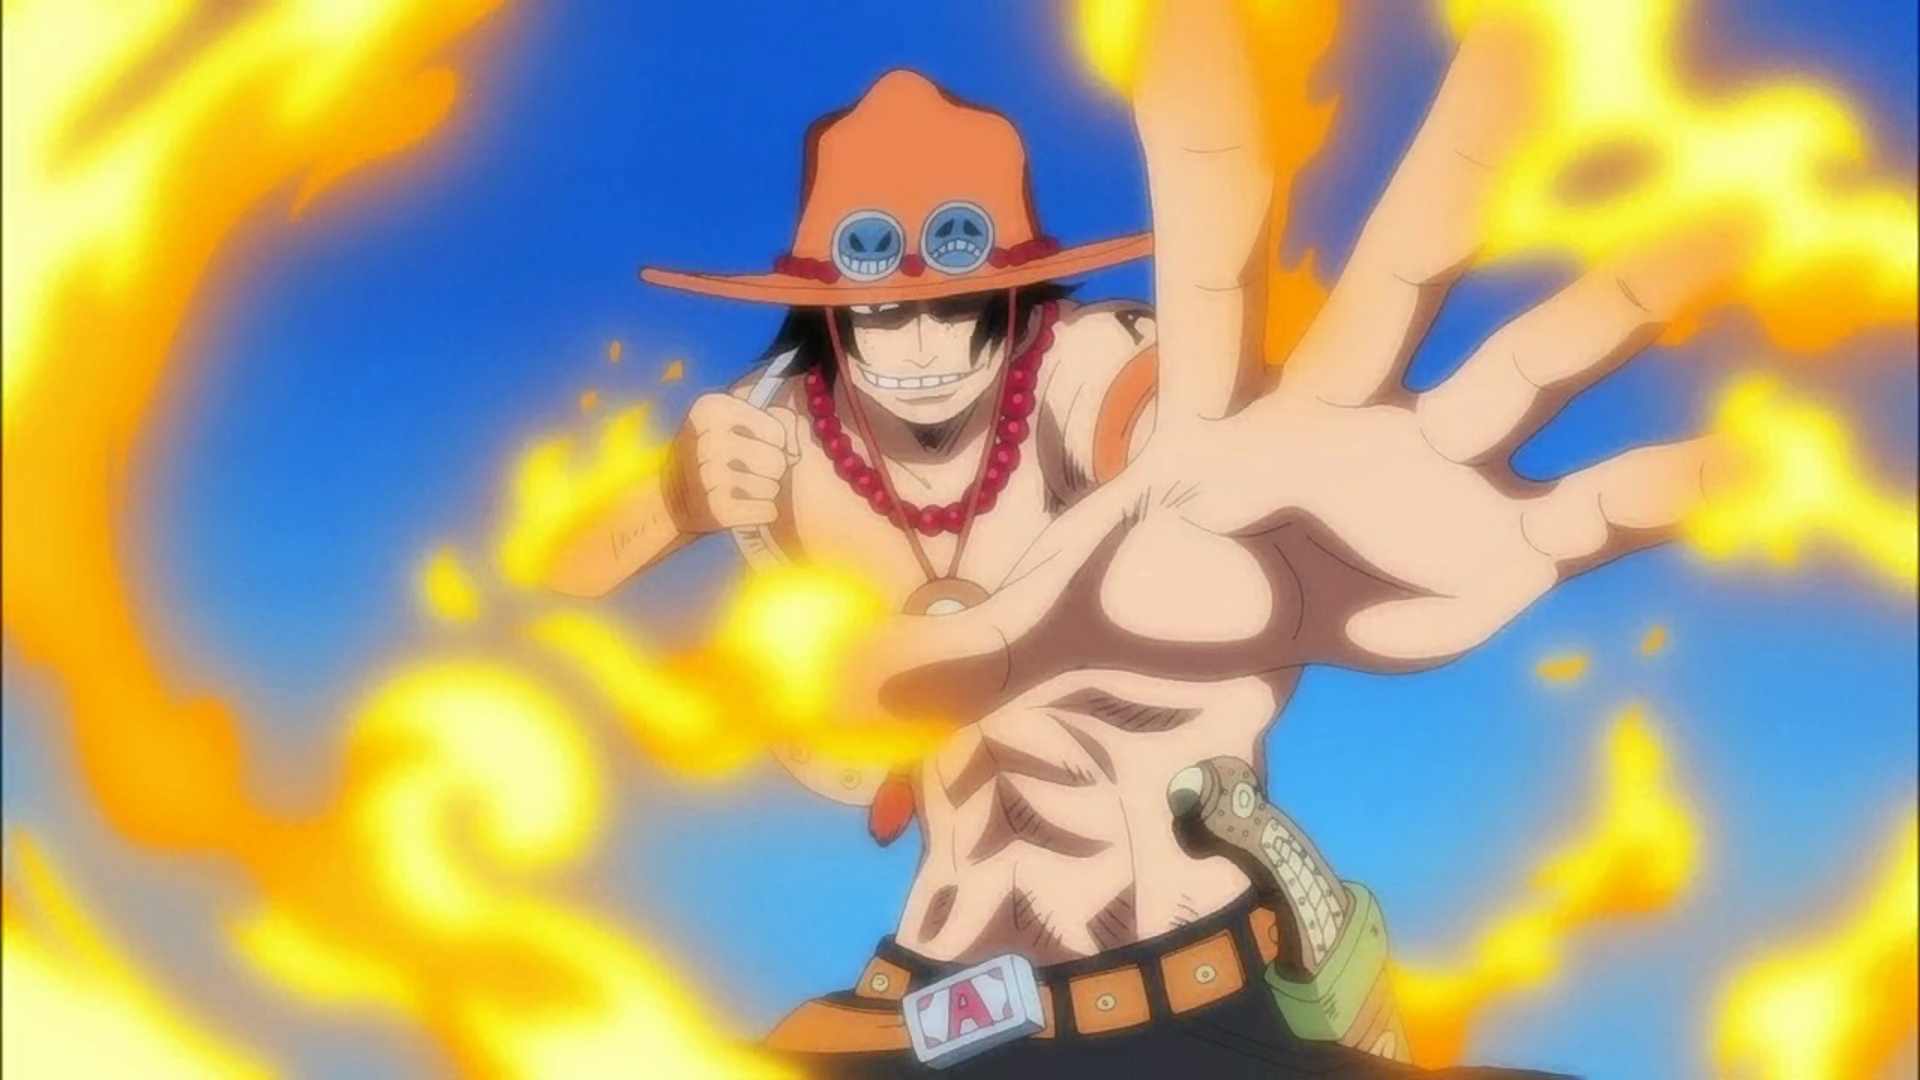 Wallpaper For > One Piece Ace Wallpaper HD